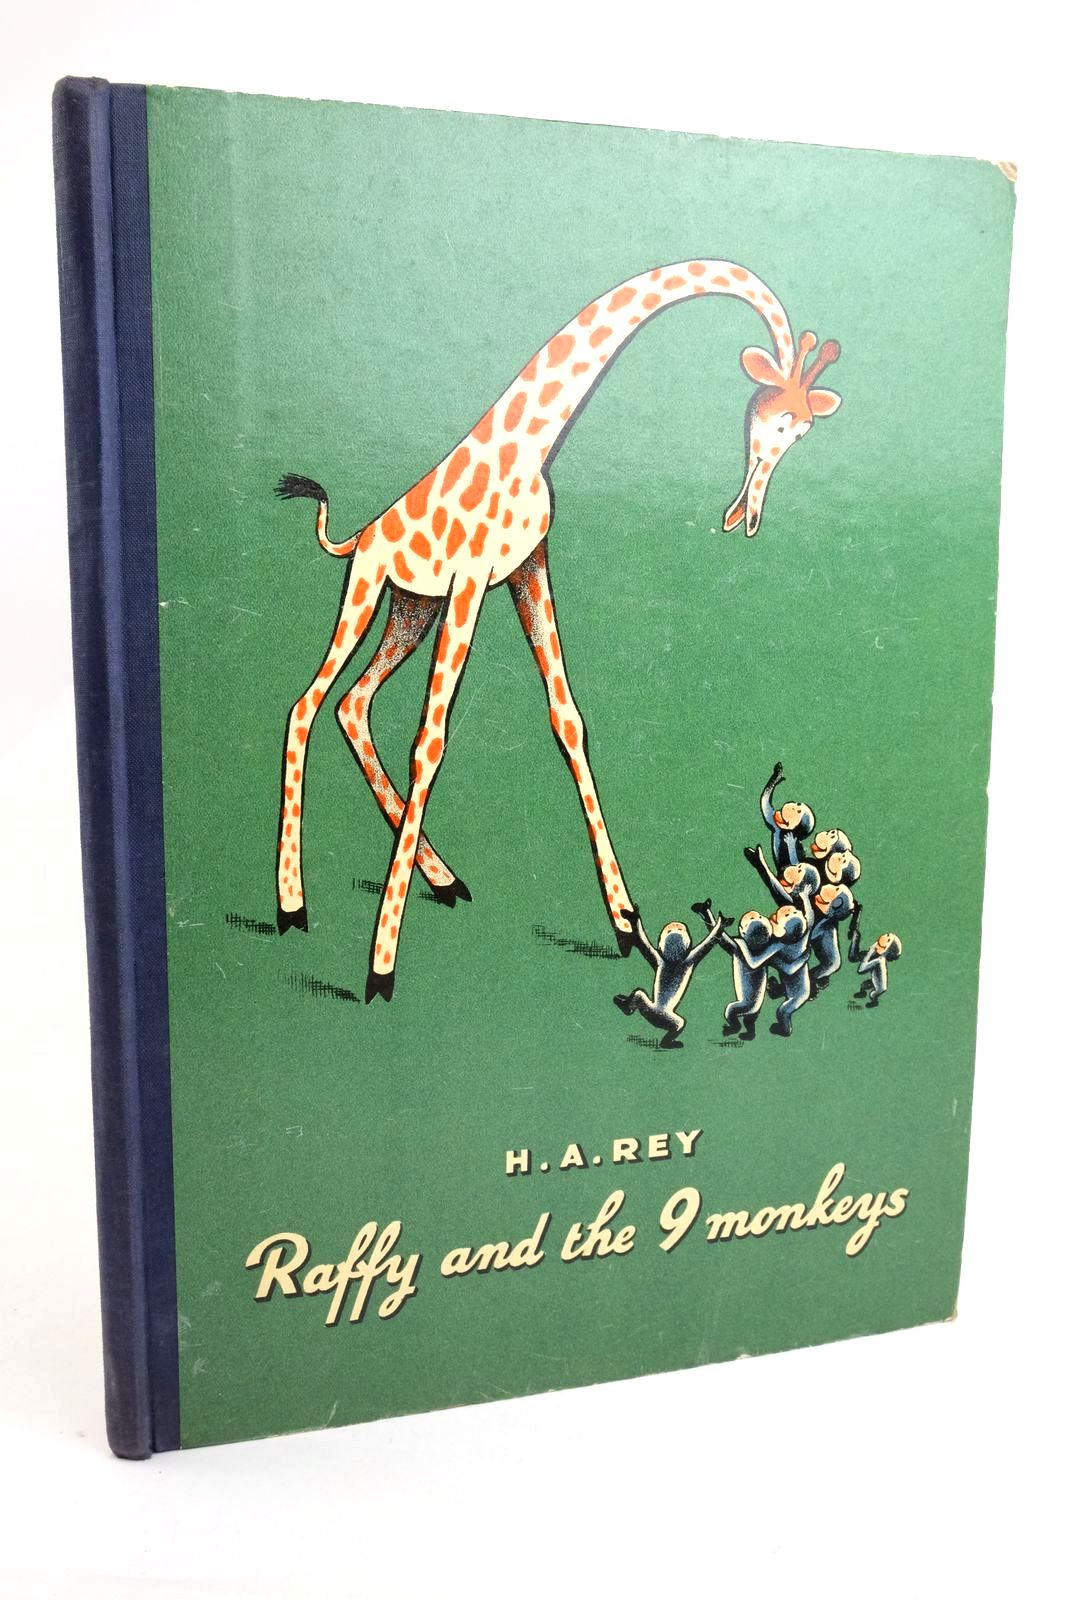 Photo of RAFFY AND THE 9 MONKEYS written by Rey, H.A. illustrated by Rey, H.A. published by Chatto & Windus (STOCK CODE: 1322251)  for sale by Stella & Rose's Books